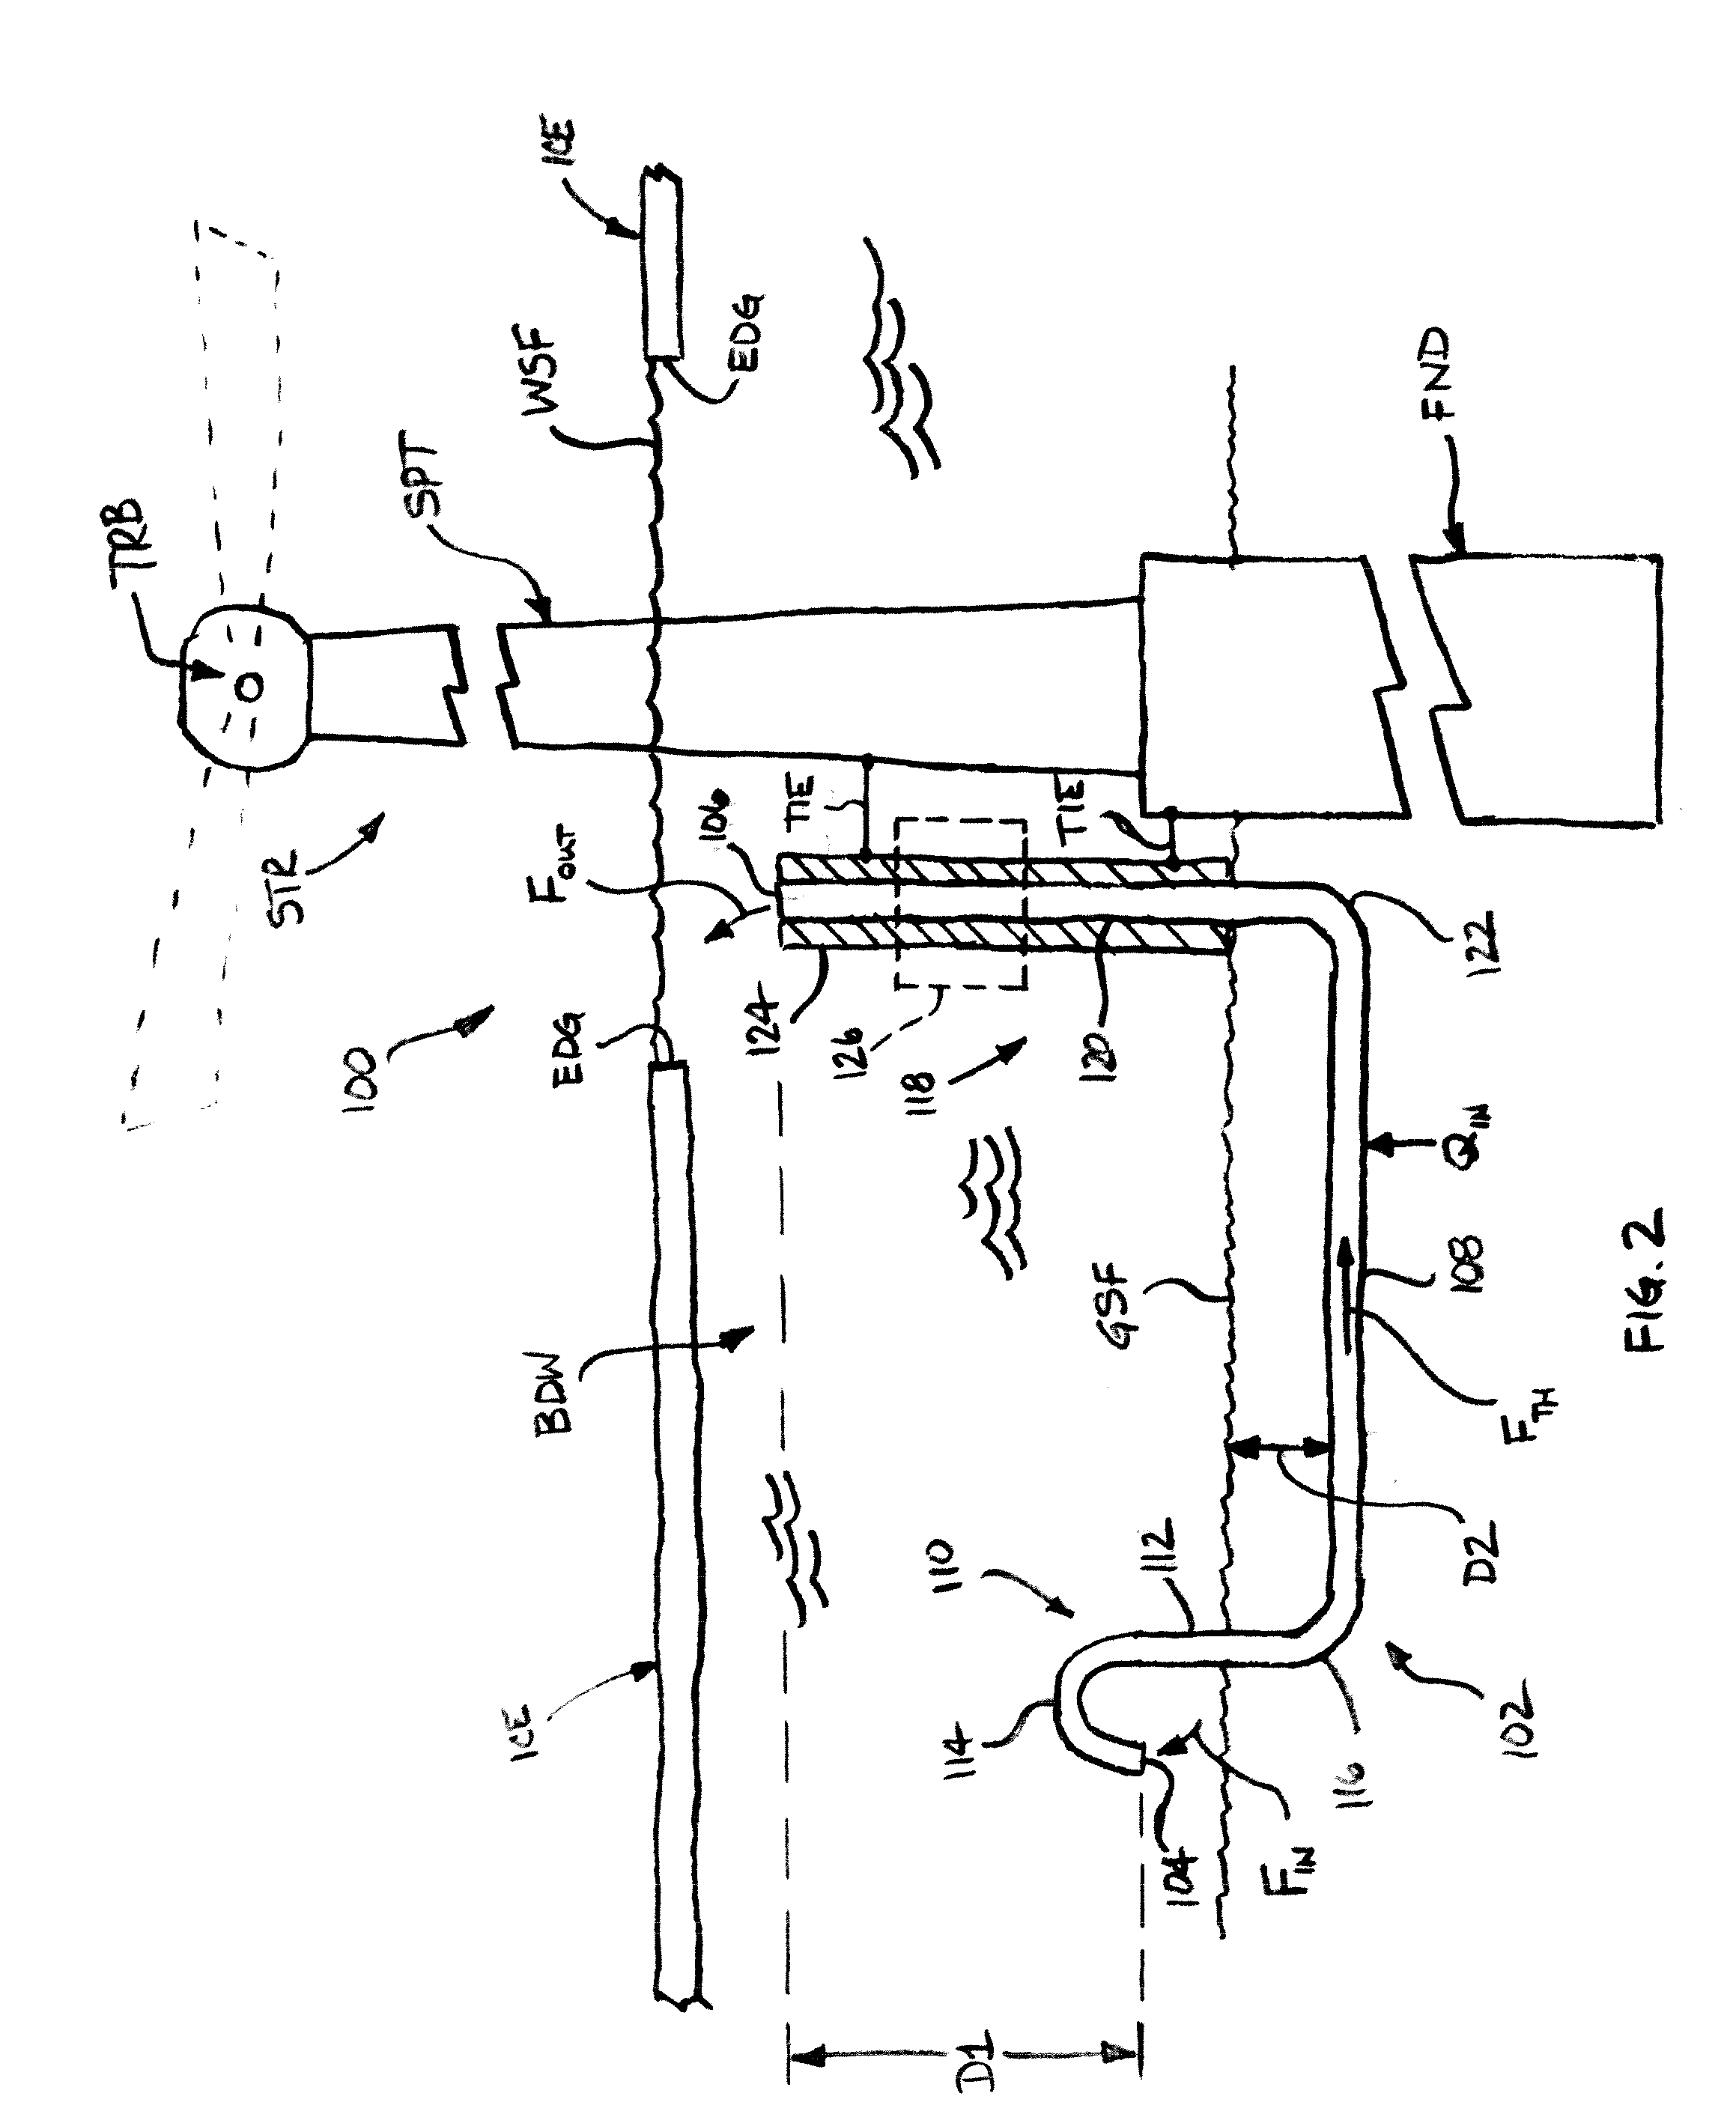 System and method for reducing ice interaction